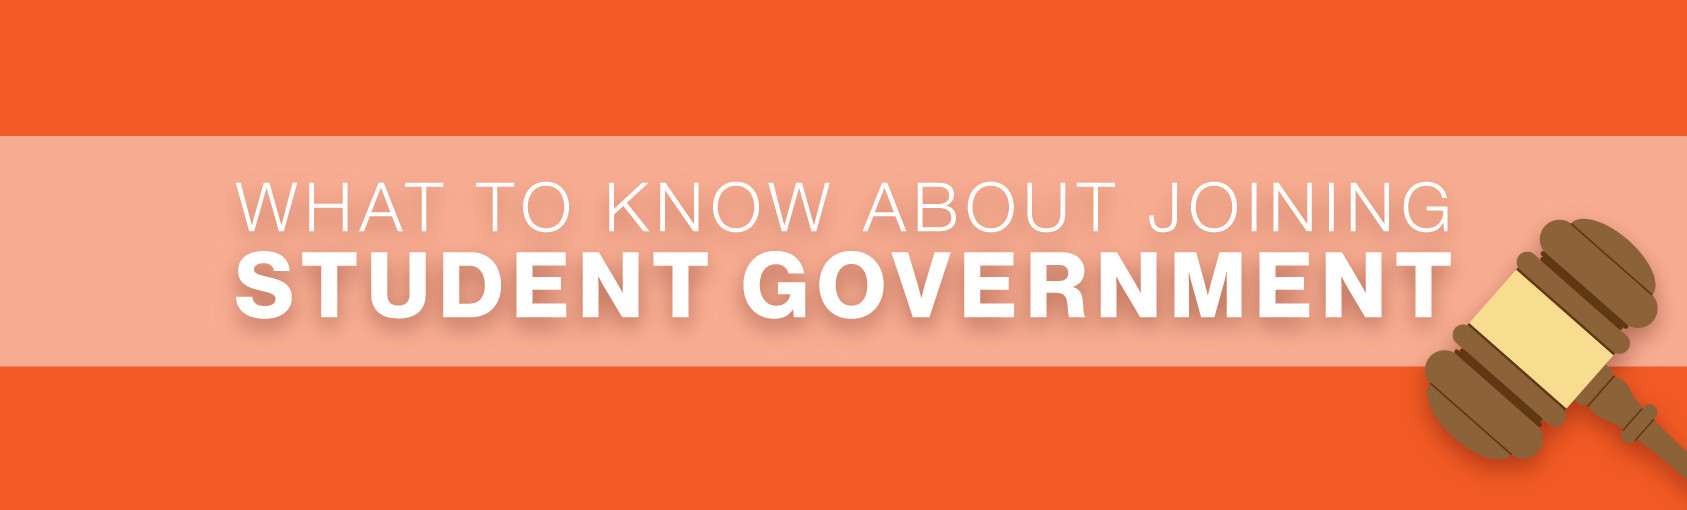 What to Know About Joining Student Government banner